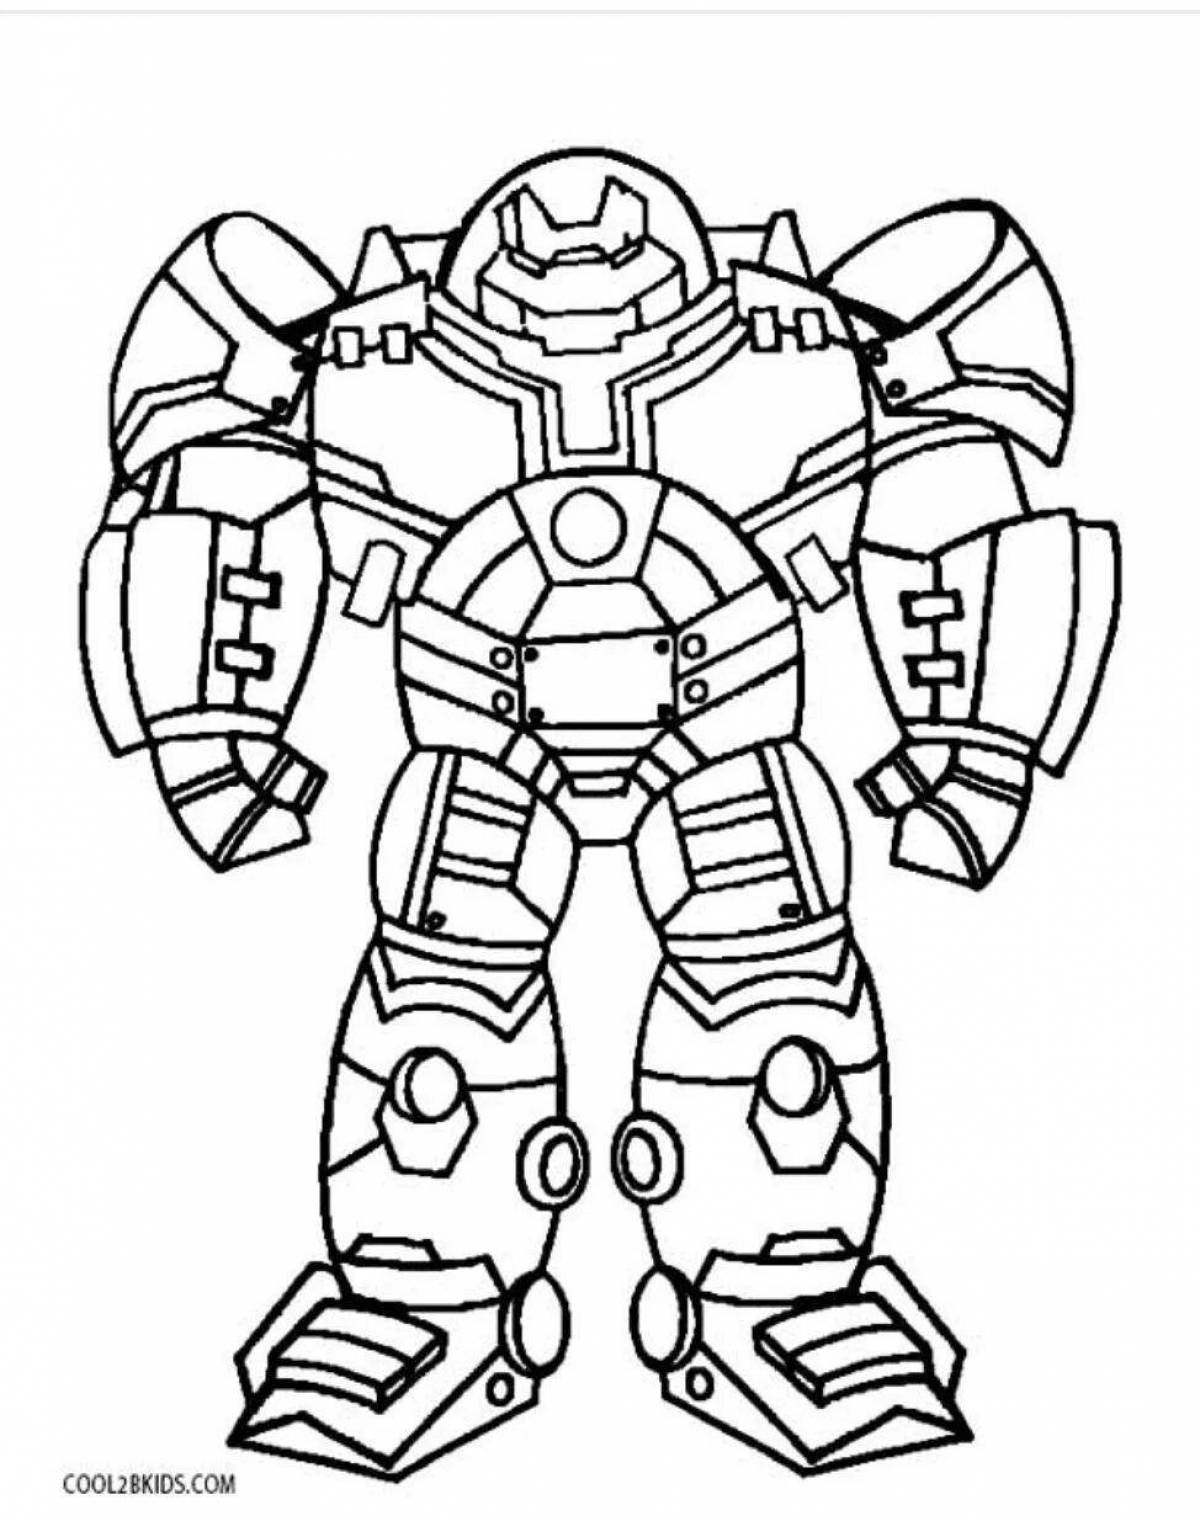 Fancy buster coloring pages